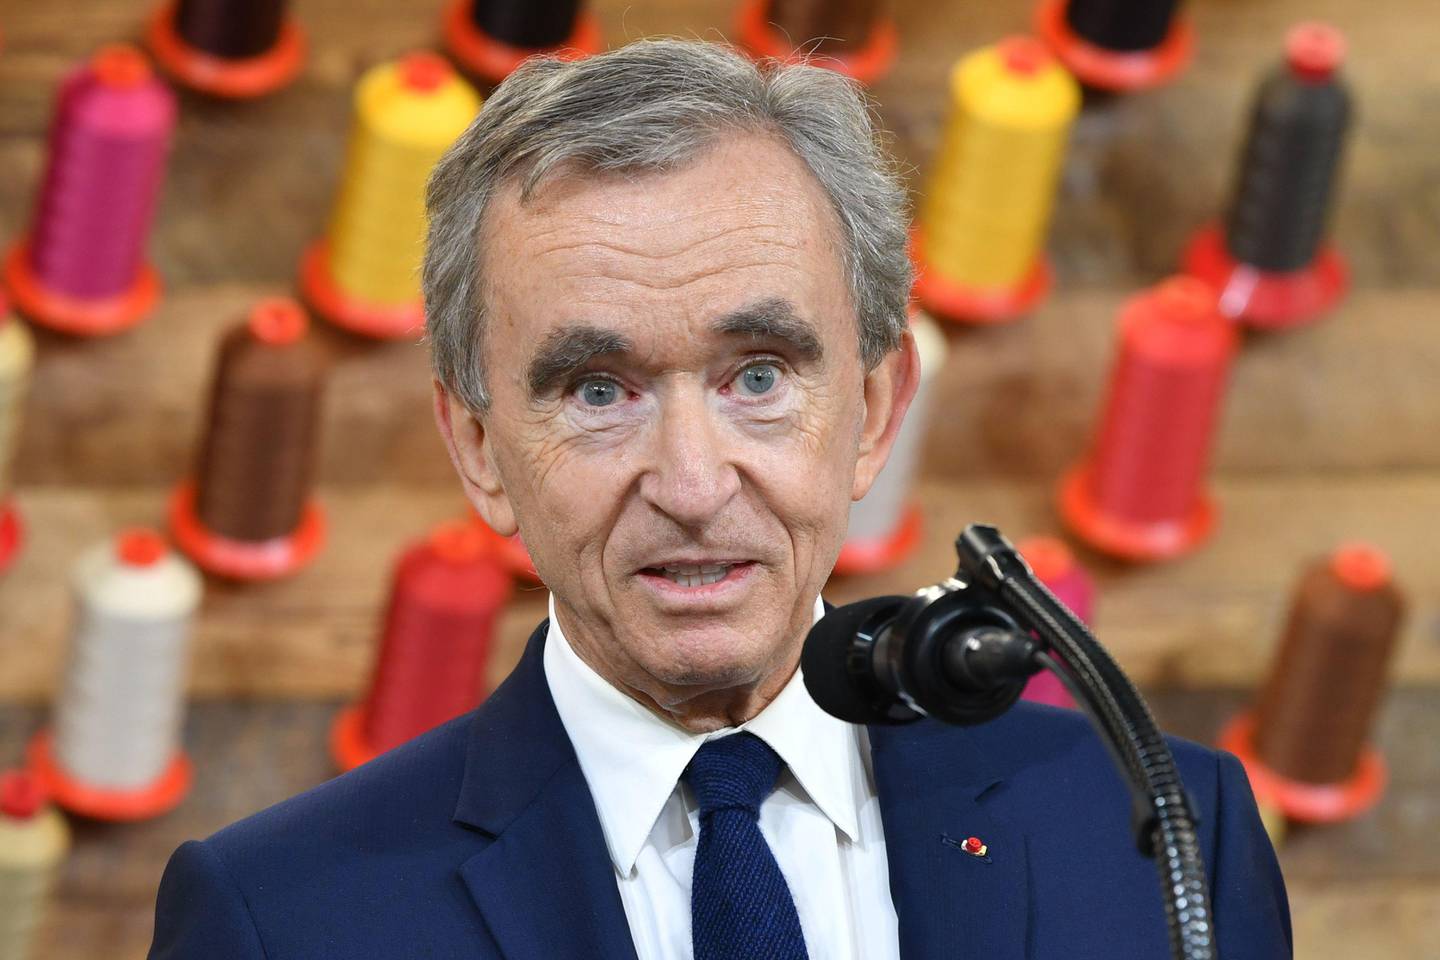 (FILES) In this file photo taken on October 17, 2019 Chief Executive of LVMH (Louis Vuitton Moet Hennessy) Bernard Arnault speaks during a visit to the new Louis Vuitton factory in Alvarado (40 miles south of Fort Worth), Johnson County, Texas. - LVMH and US jewellers Tiffany announced on November 25, 2019 a $16.2 billion tie-up that is the French luxury group's biggest-ever acquisition and will bolster its presence in the United States. The companies said in a statement they "have entered into a definitive agreement whereby LVMH will acquire Tiffany for $135 per share in cash, in a transaction with an equity value of approximately 14.7 billion euros or $16.2 billion." (Photo by Nicholas Kamm / AFP)